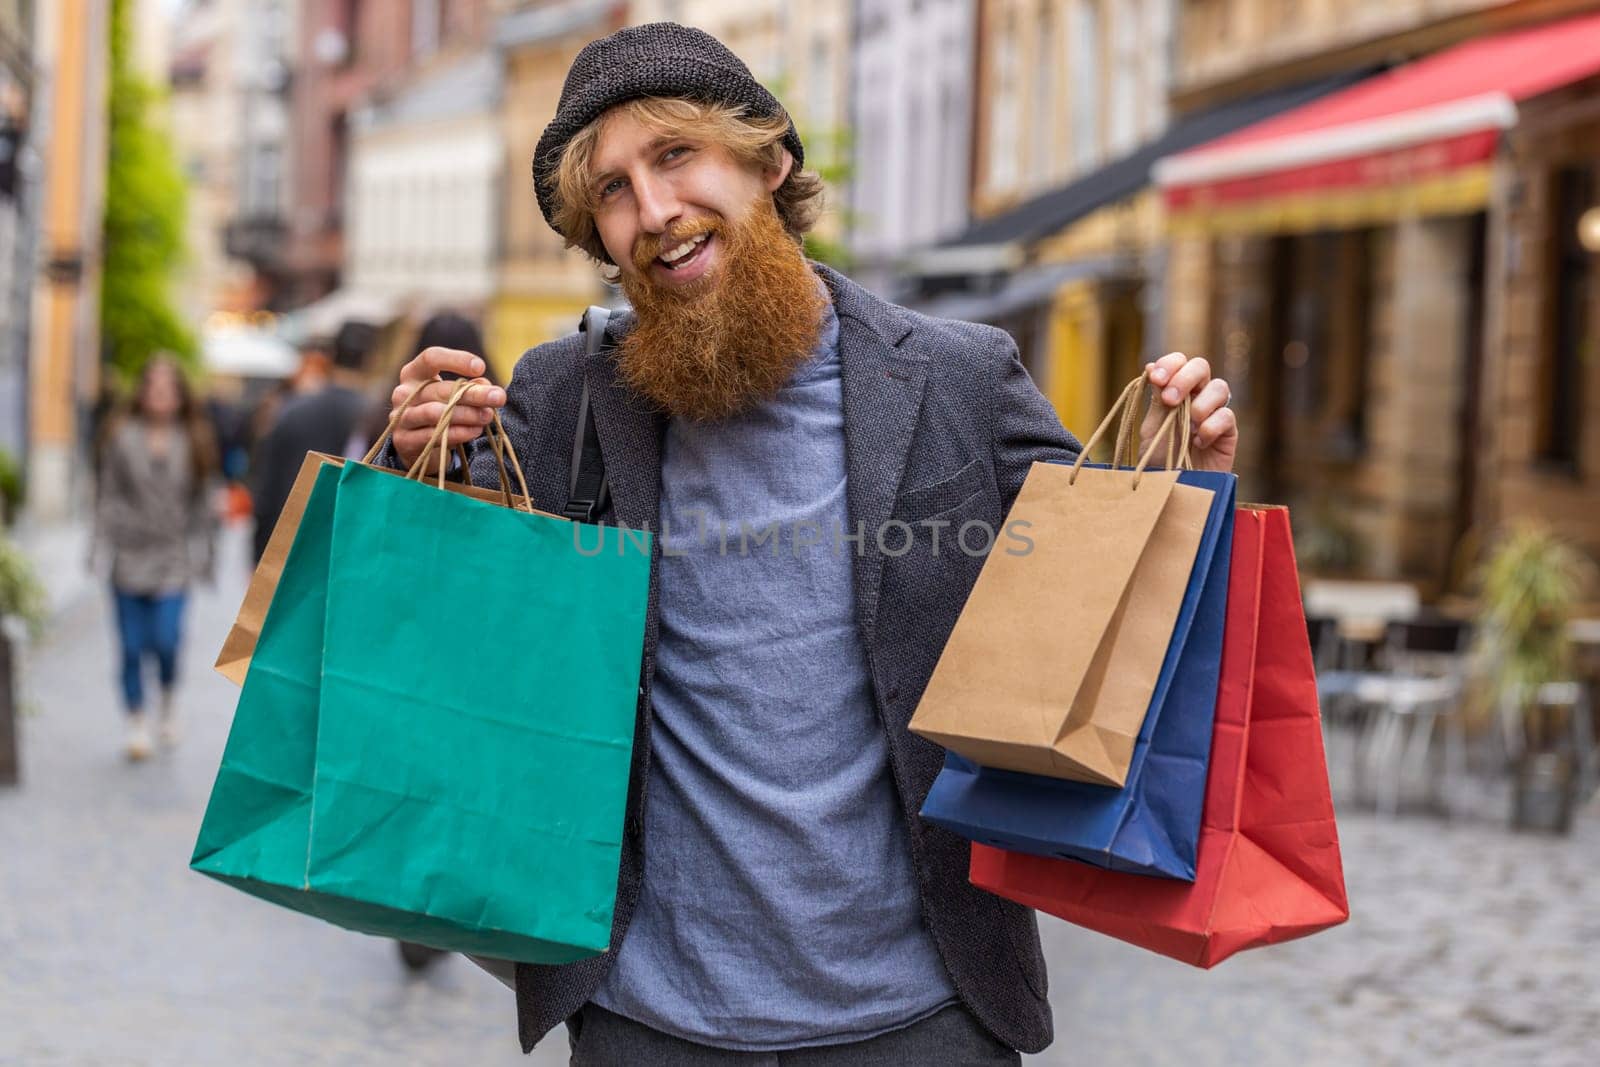 Happy young man shopaholic consumer after shopping sale with full bags walking in city street by efuror